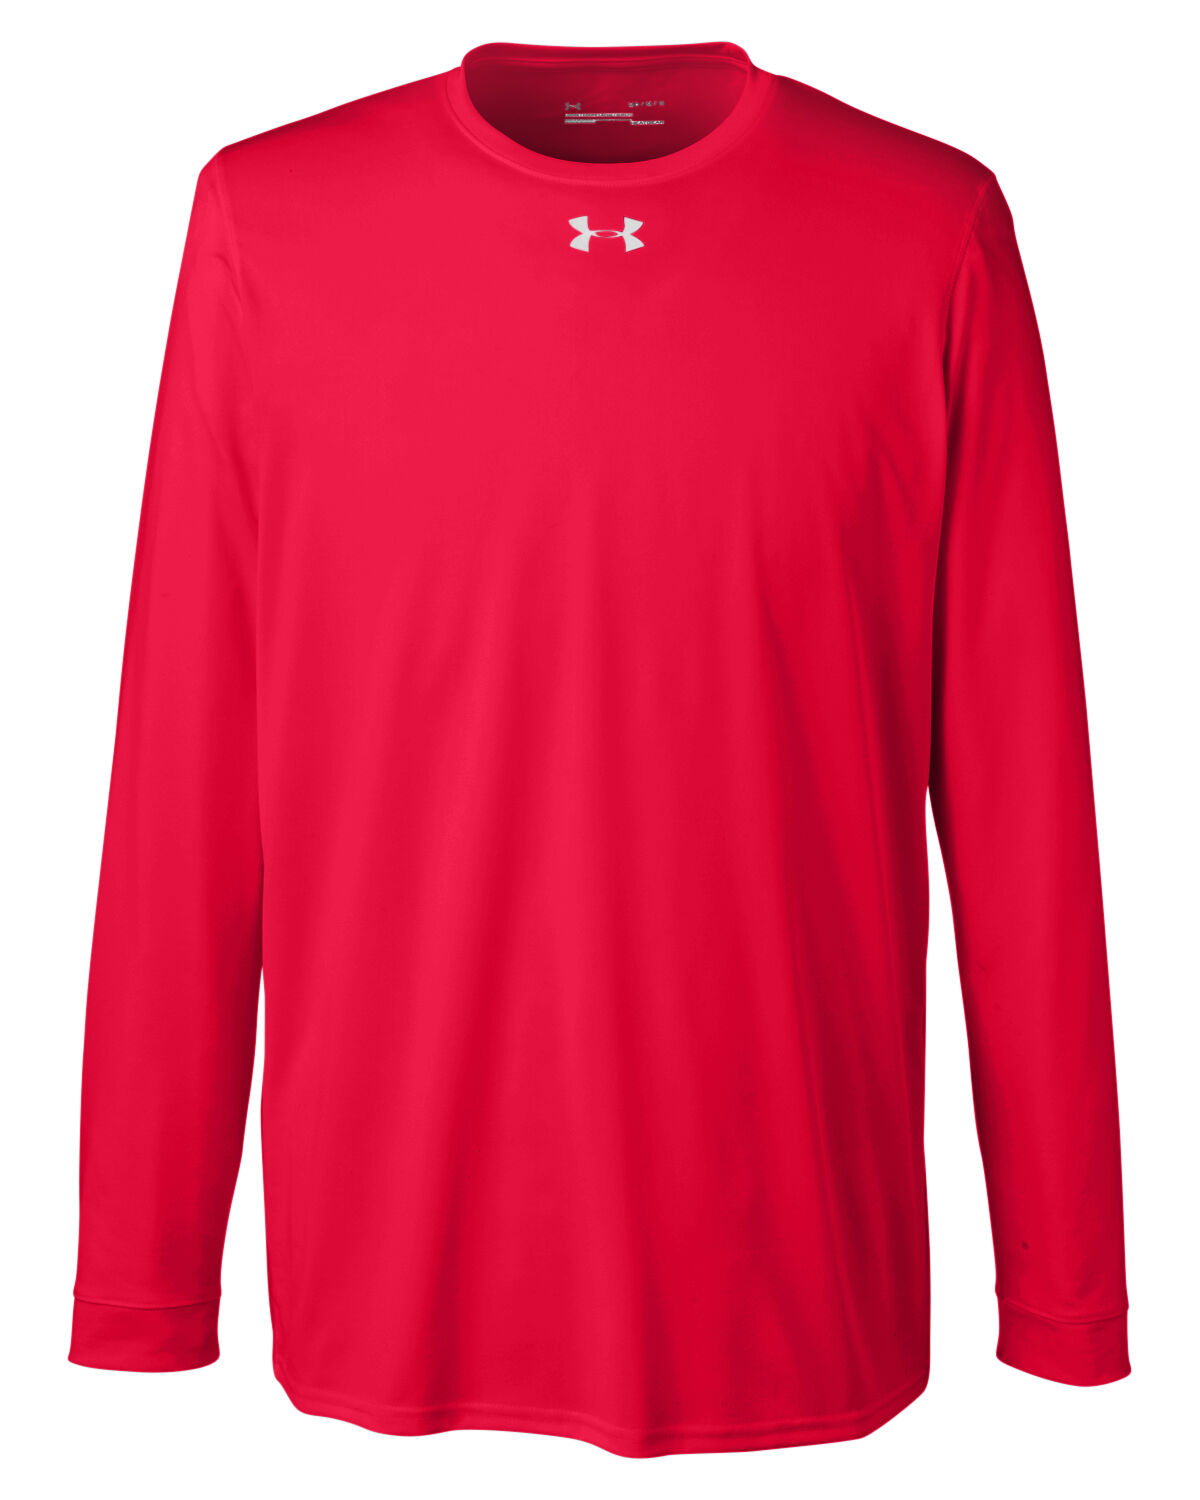 Custom Branded Under Armour T-Shirts - Red/Metallic Silver